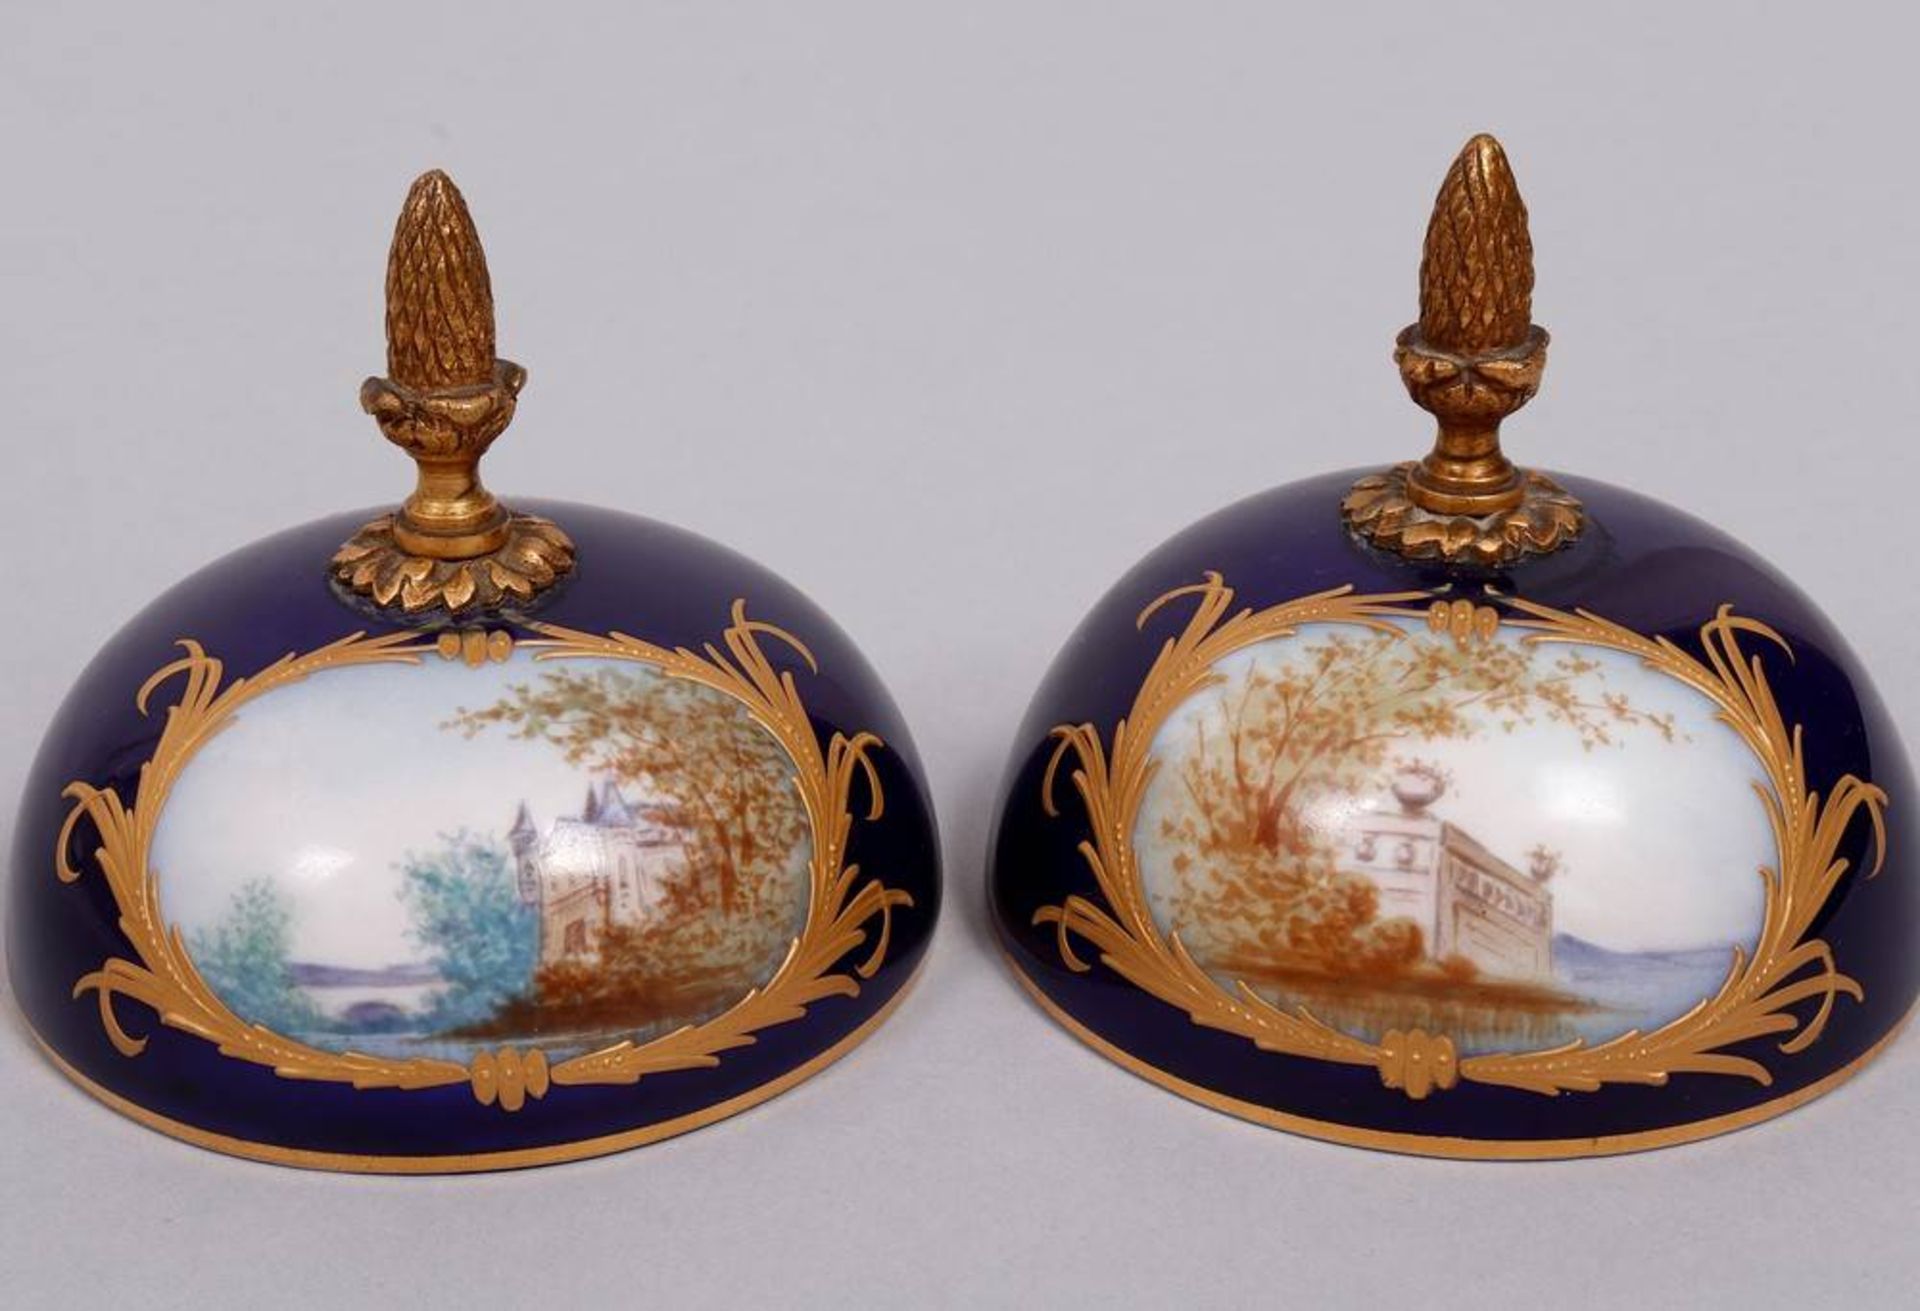 Pair of lidded vases, Chateau des Tuileries, Sèvres, around 1840 - Image 8 of 15